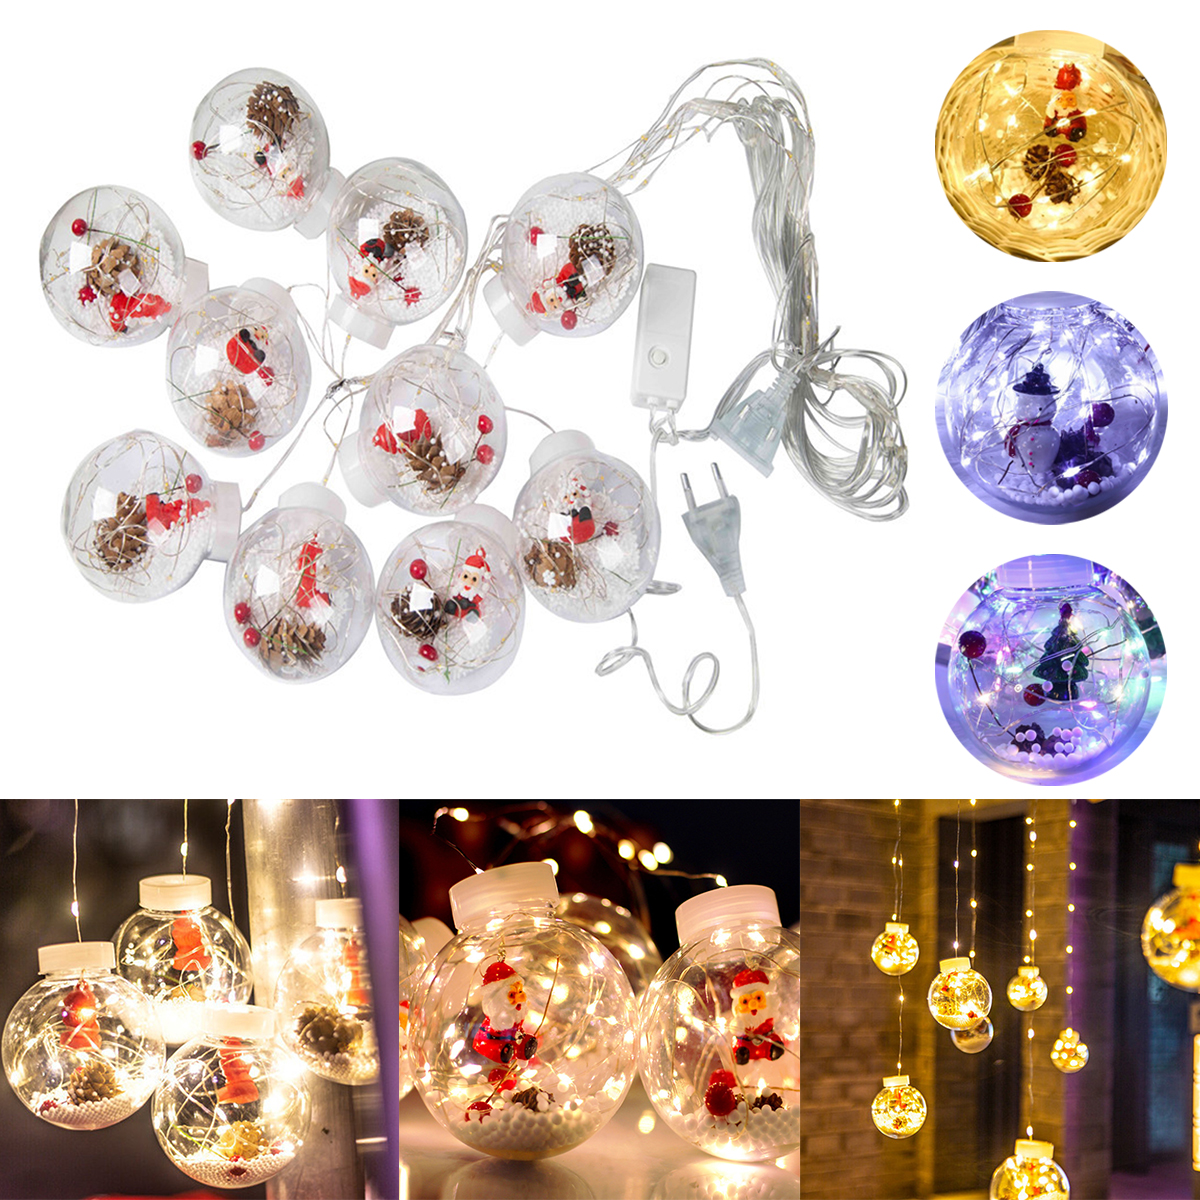 LED-Fairy-String-Curtain-Window-Lights-Holidays-Party-Waterproof-Christmas-Decorations-Lights-1782242-2